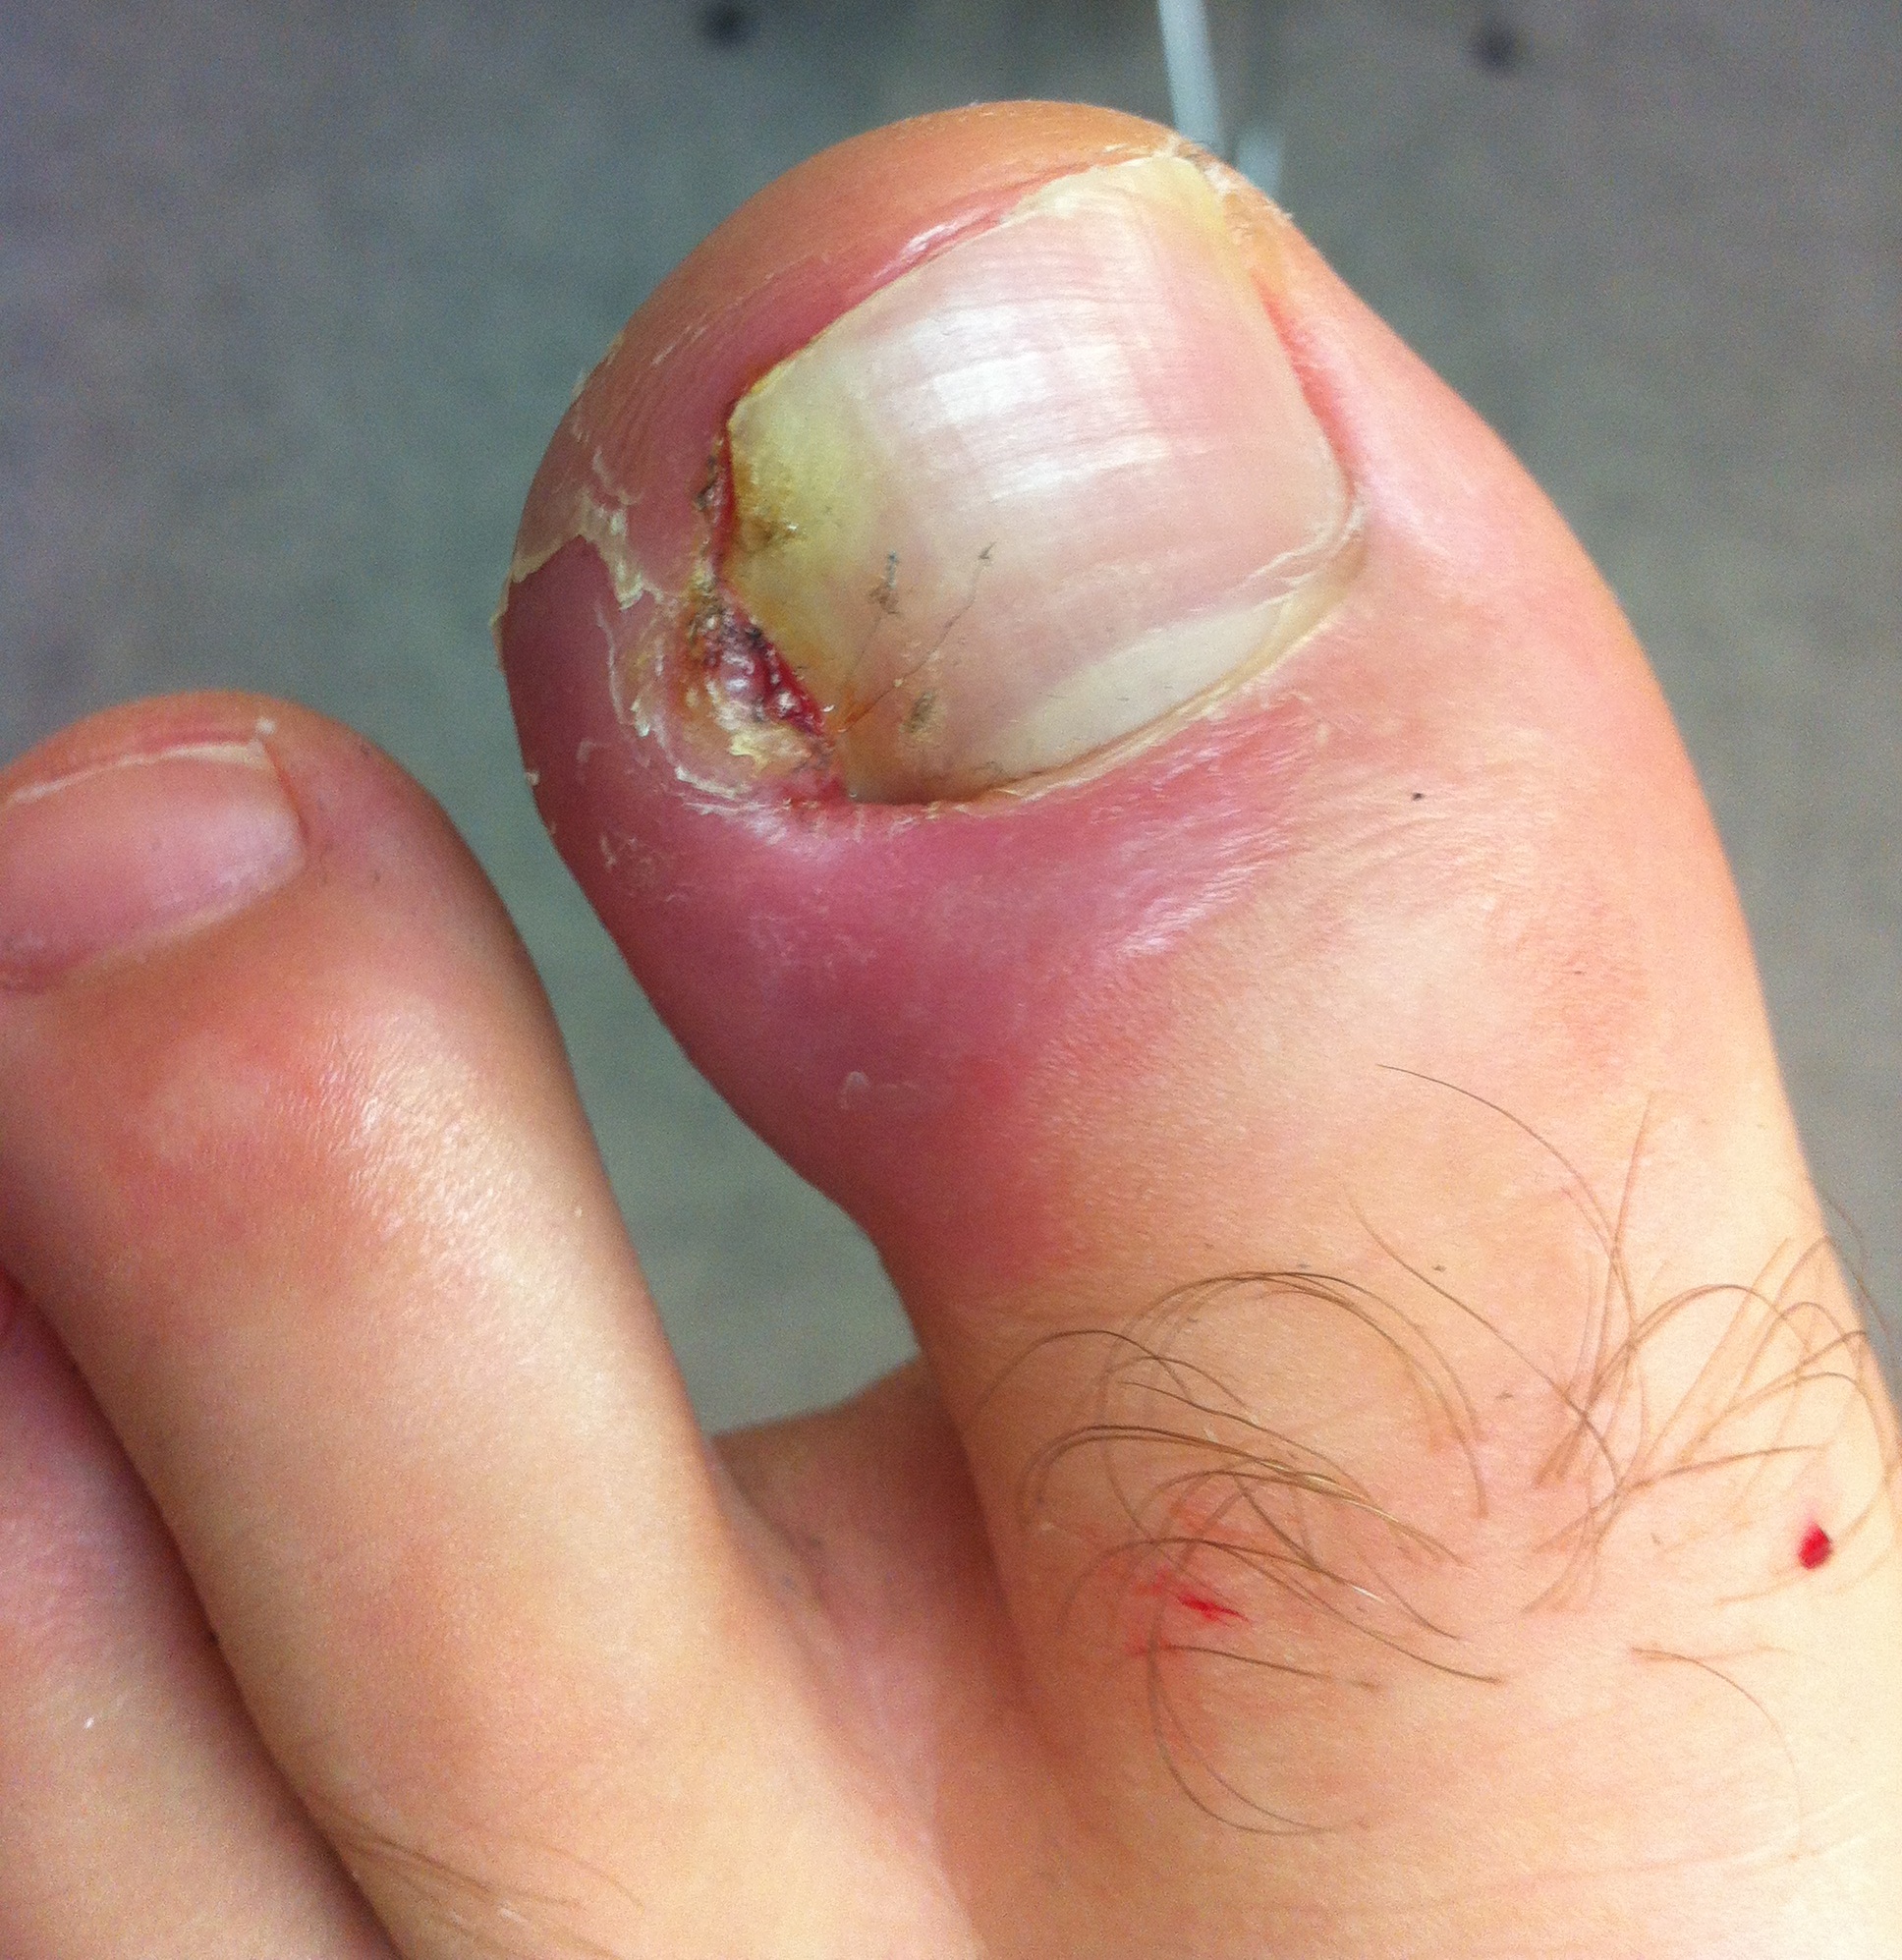 Ingrown Toenail Surgery - Foot & Ankle Experts Health Clinic